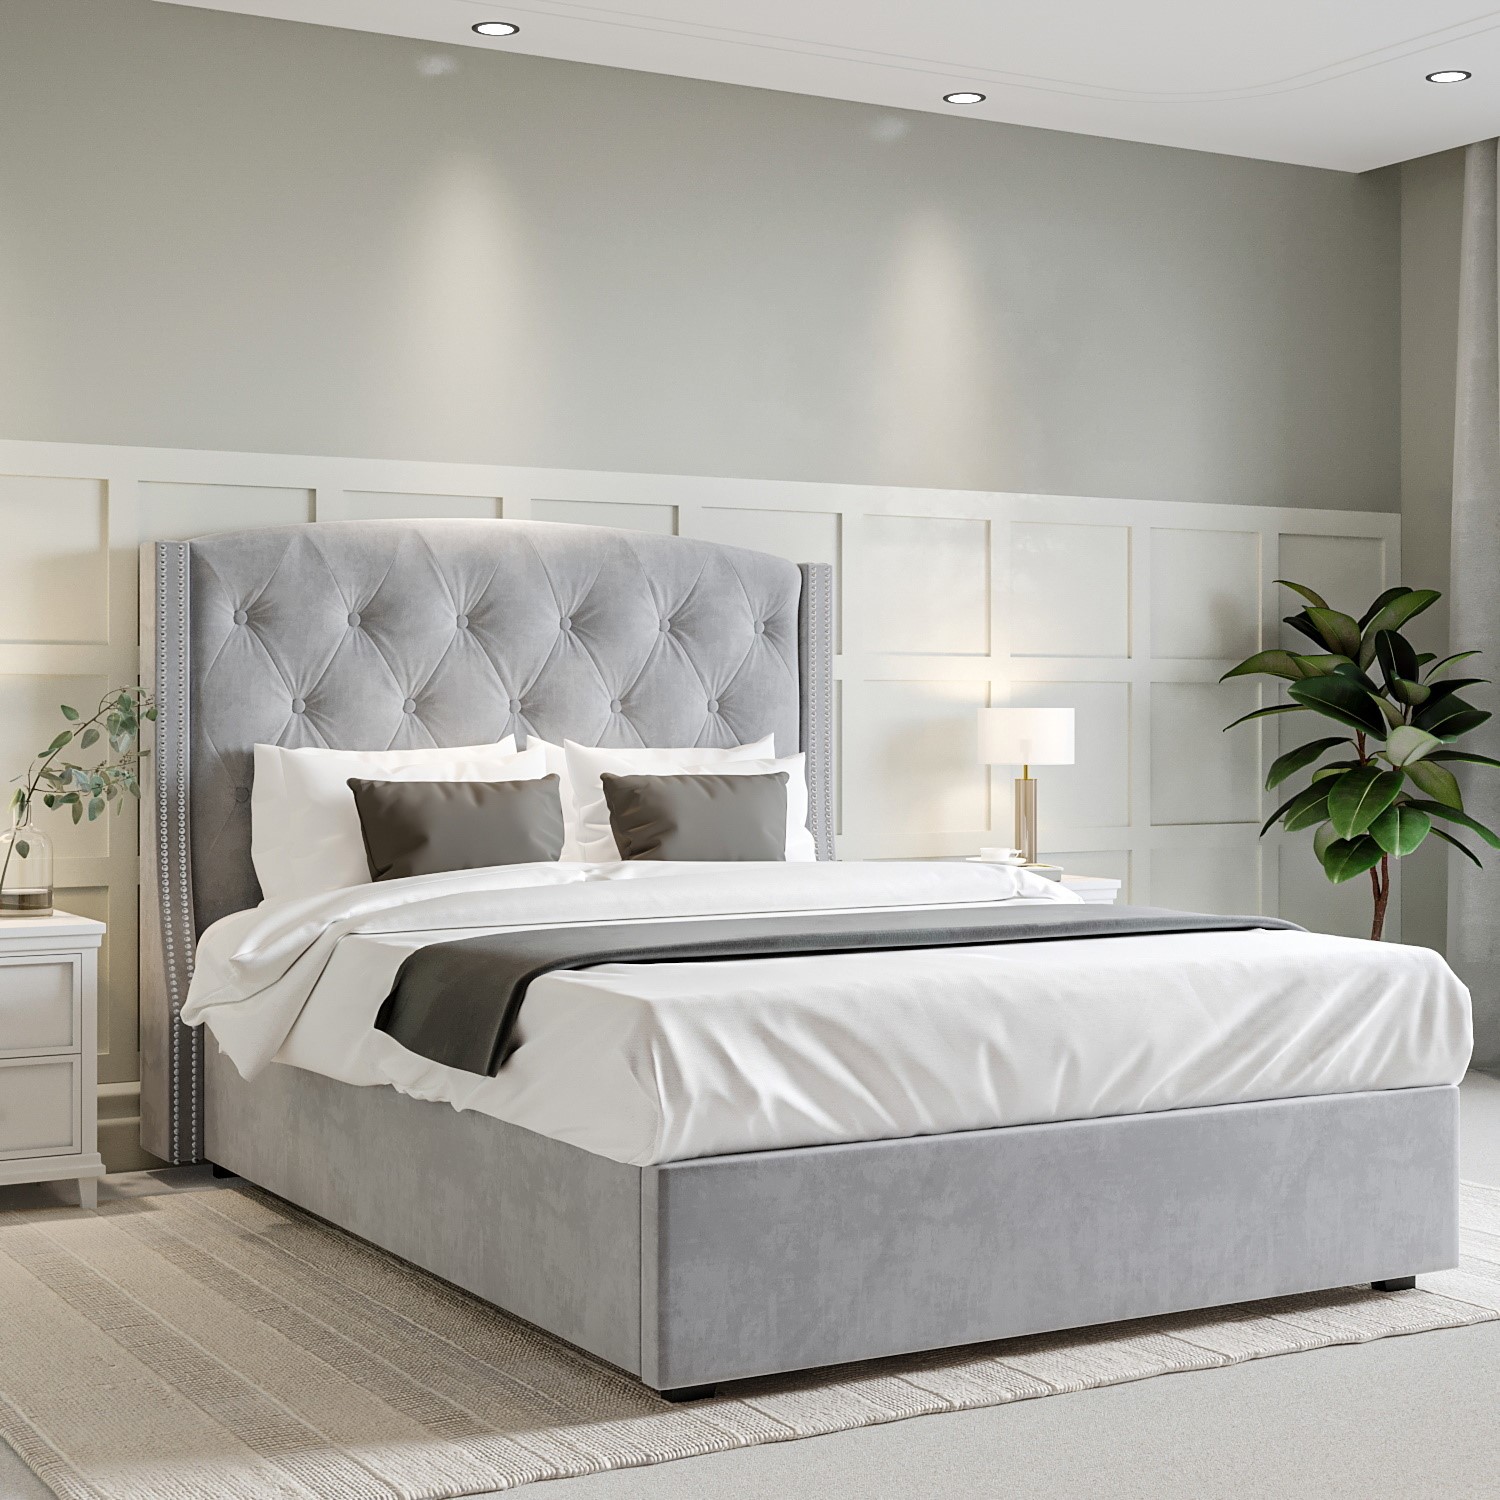 Photo of Grey velvet king size ottoman bed with chesterfield studded headboard - safina